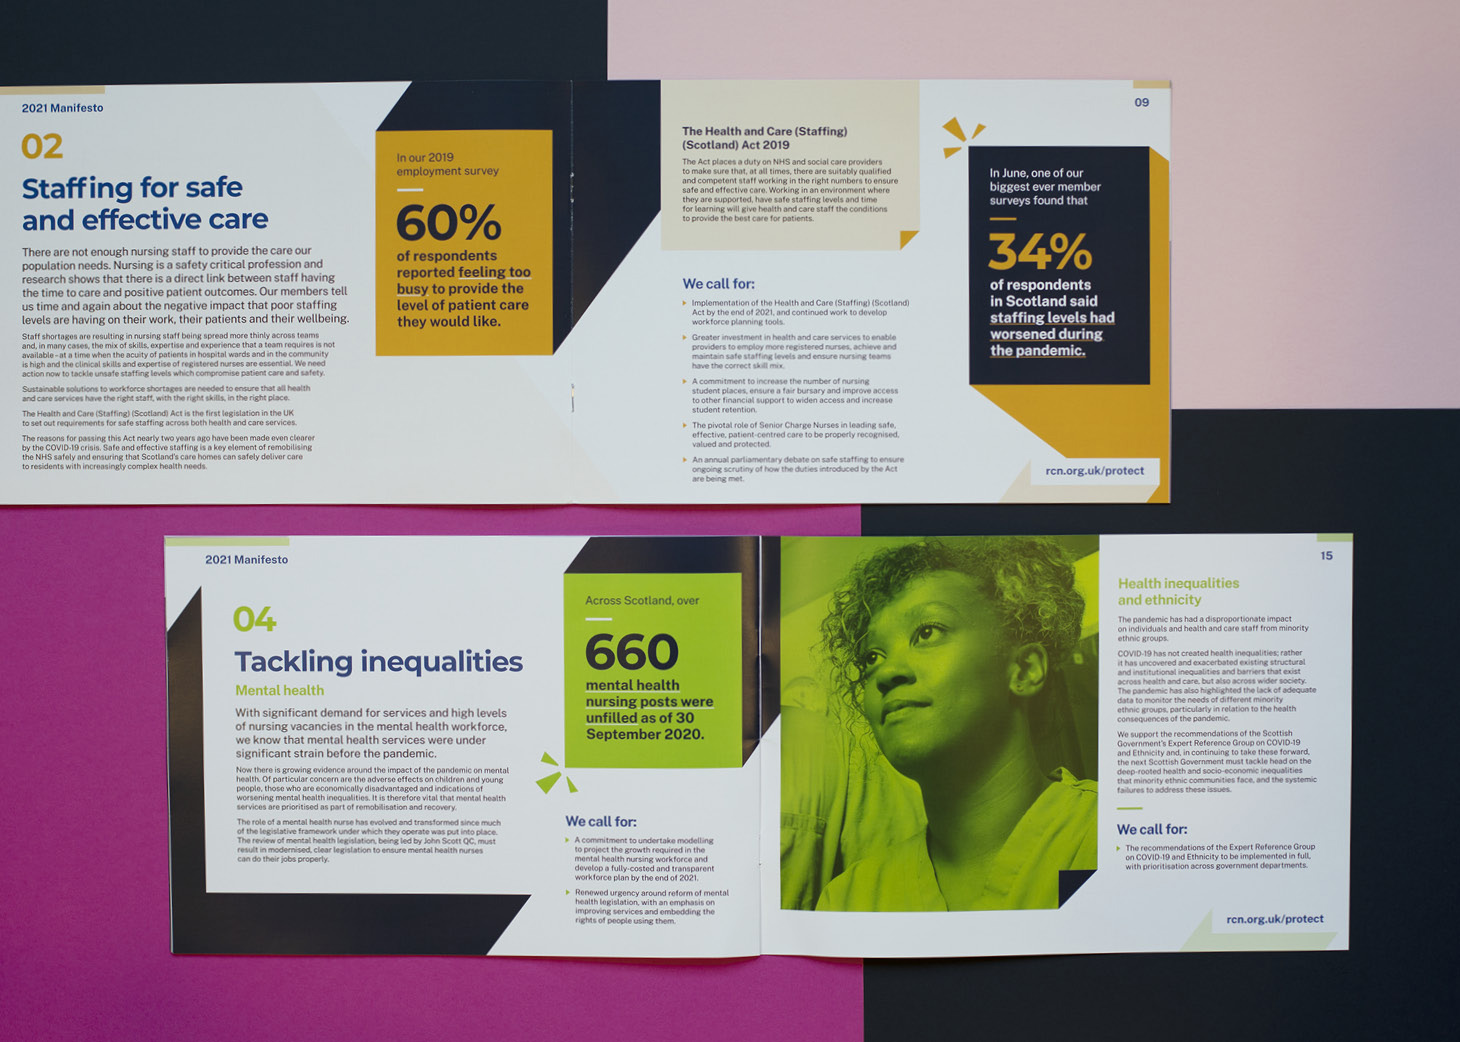 Two booklet spreads caption "Staffing for safe and effective care" and "Tackling inequalities".